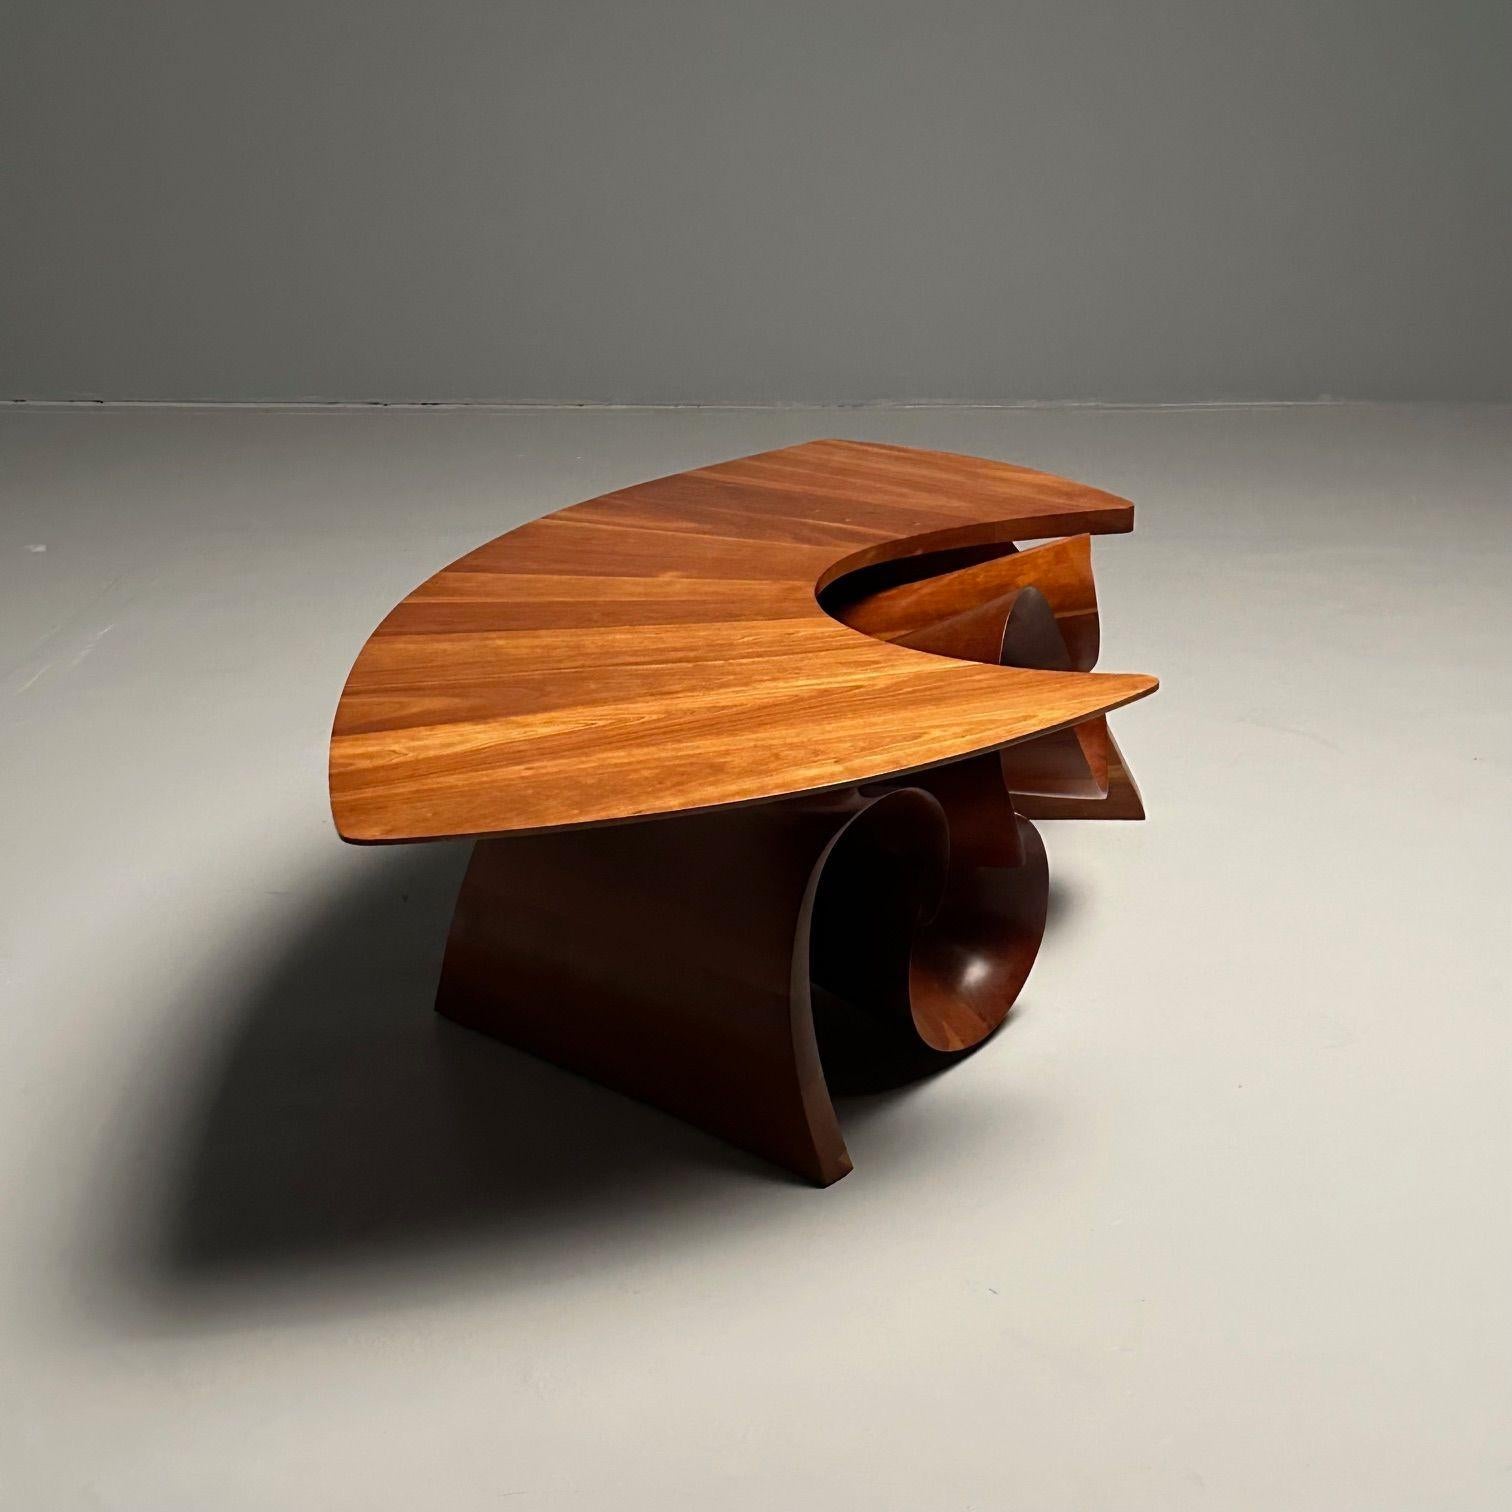 Peter Michael Adams, Mid-Century, Sculptural Coffee Table, Walnut, USA, 1970s For Sale 2